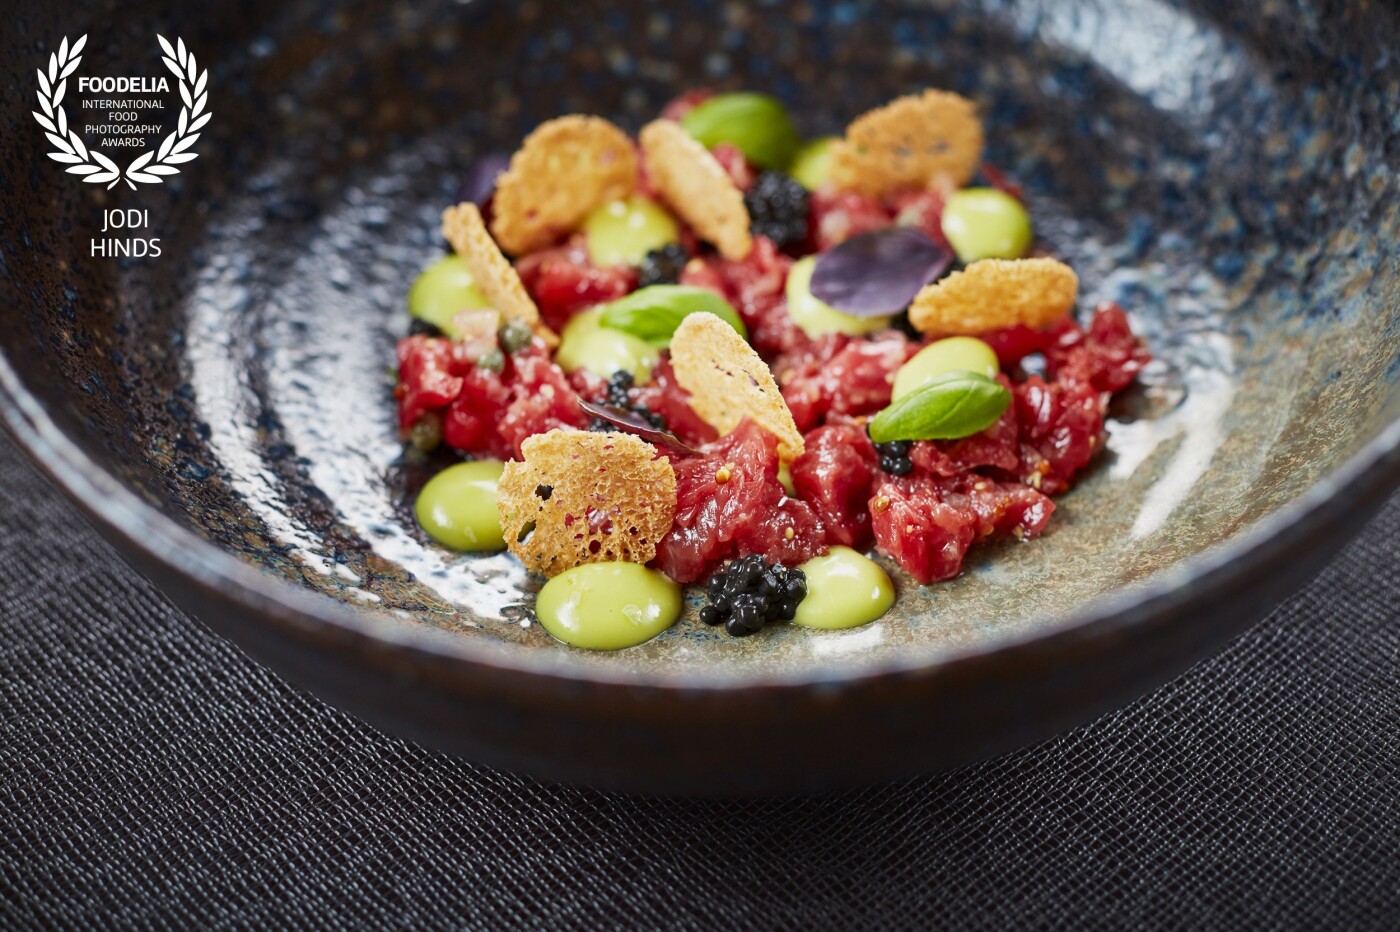 Bavette Tartare from the talented kitchen @simpsons_restaurant<br />
Chefs: @luke.tipping <br />
Restaurant: @simpsons_restaurant<br />
Photographer: @jodihindsphoto